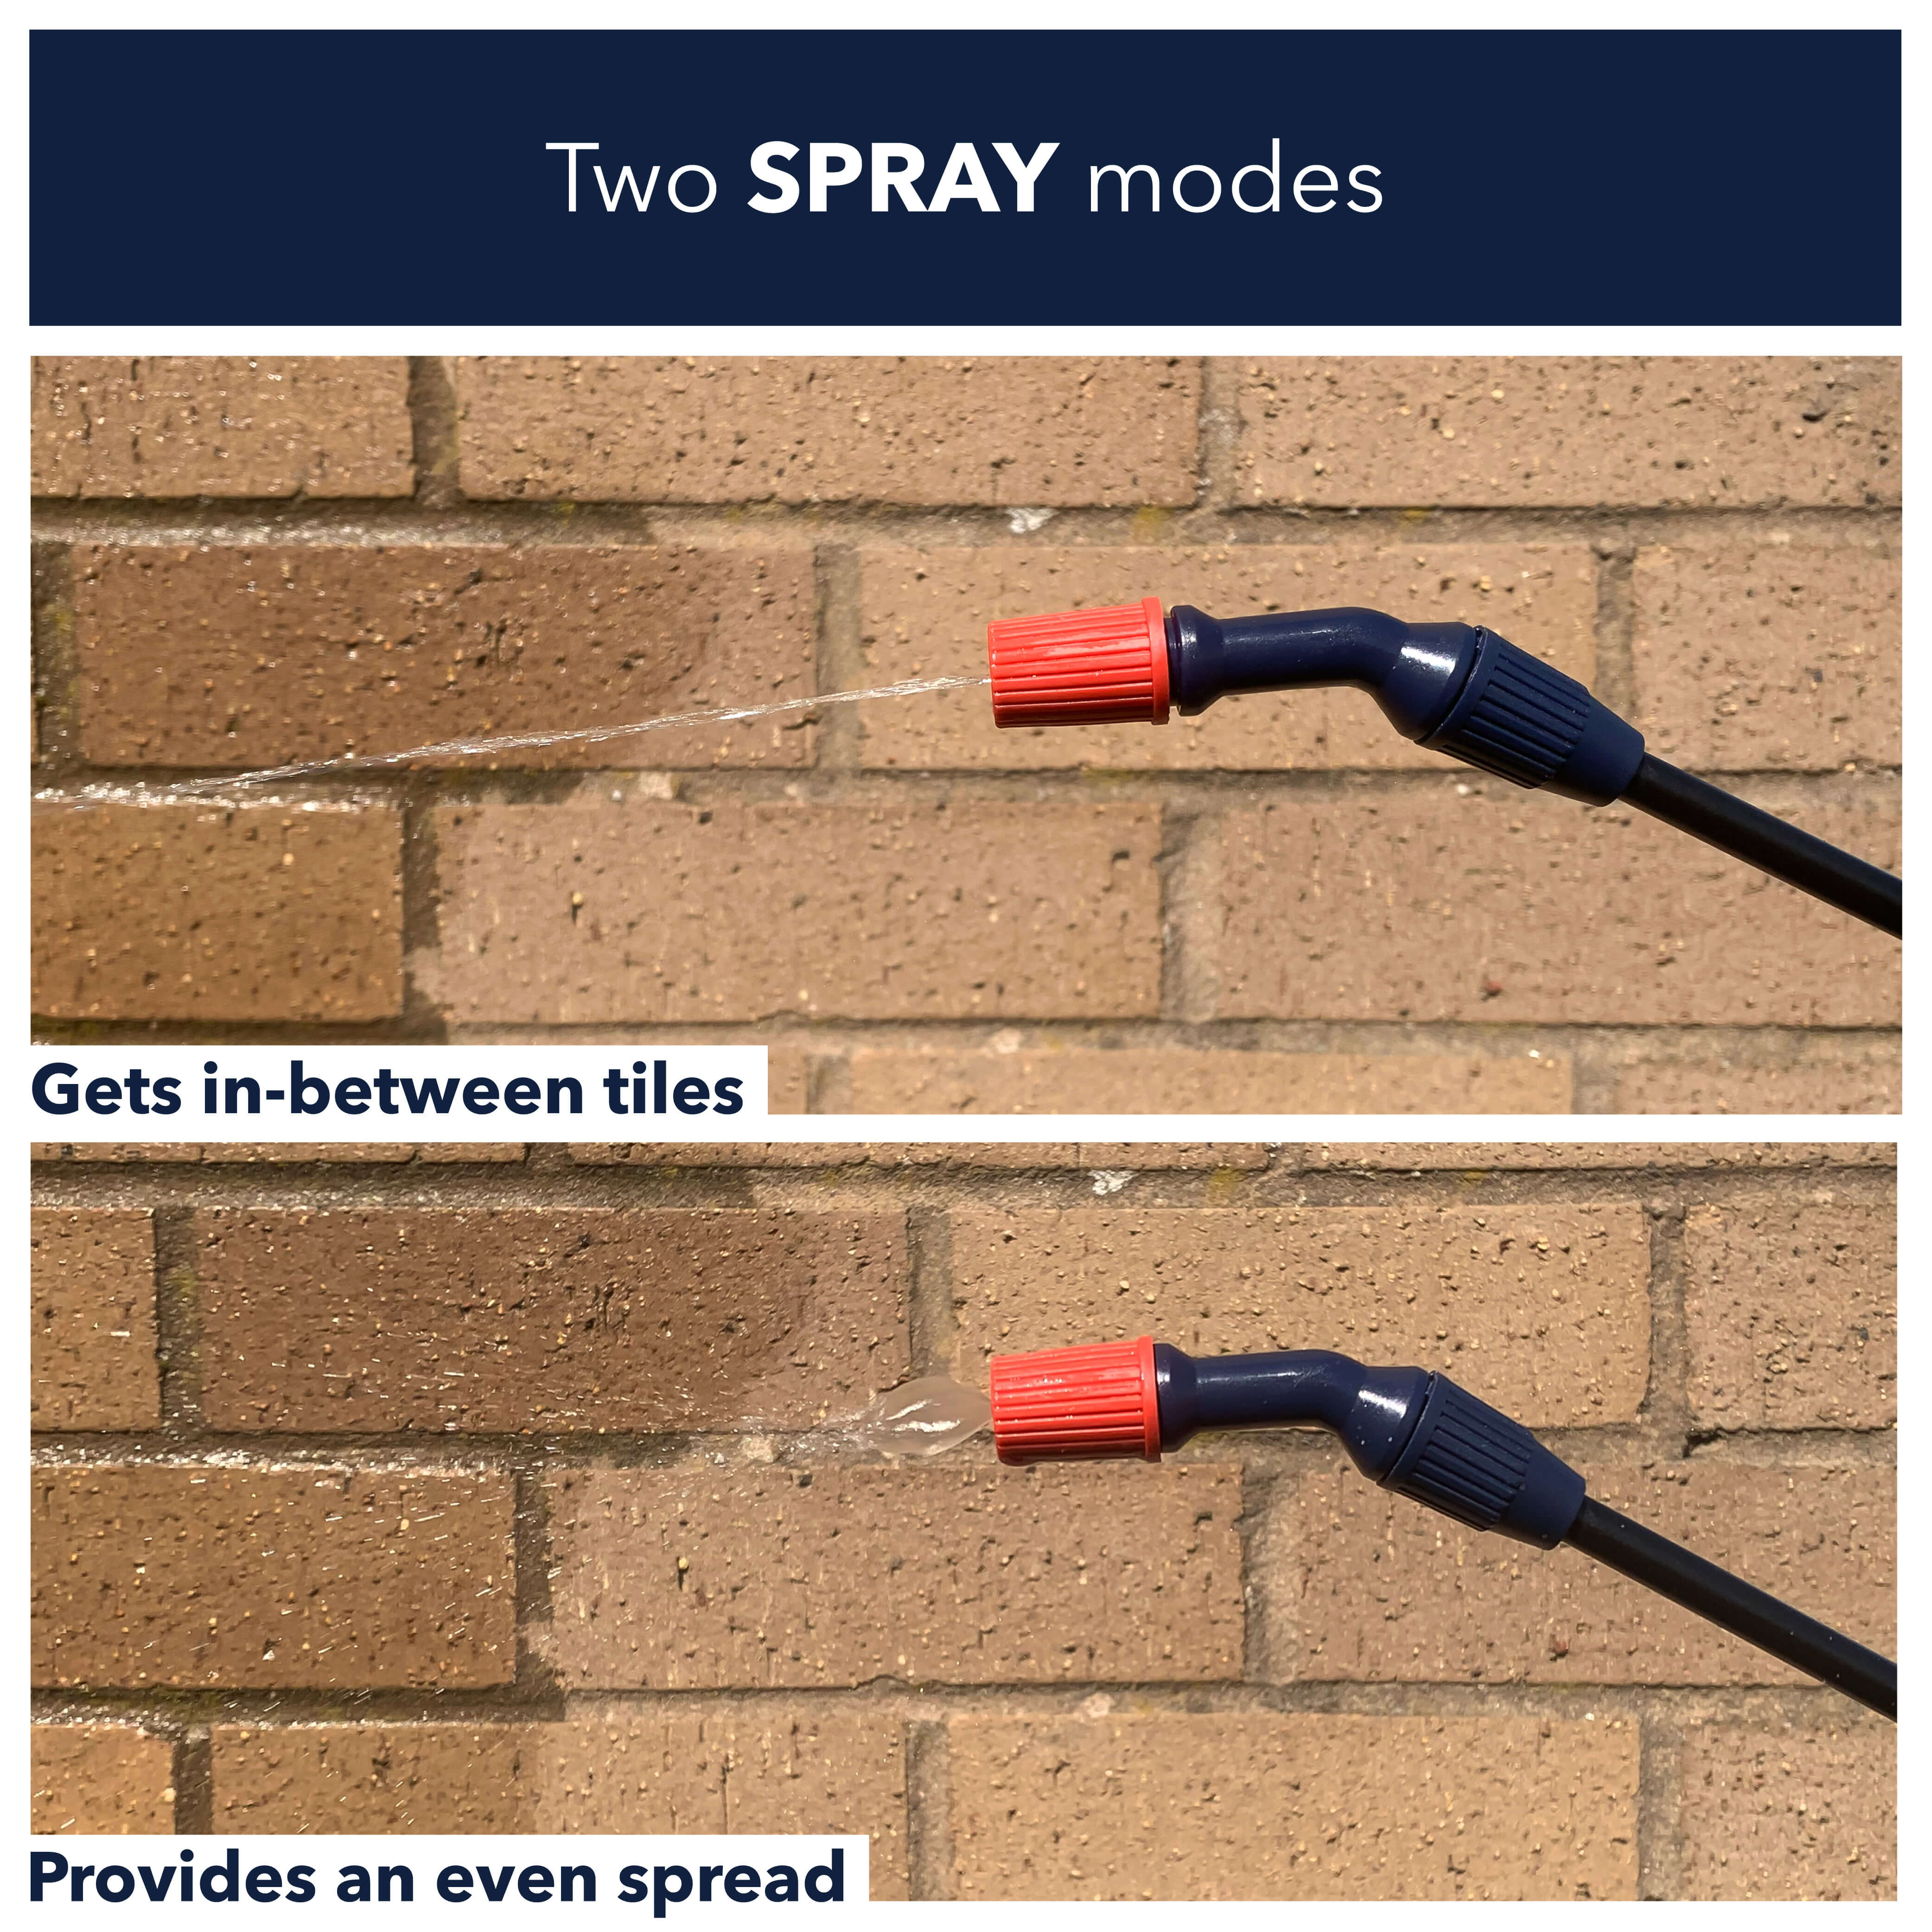 Two spray modes, one gets in-between tiles and the other provides an even spread